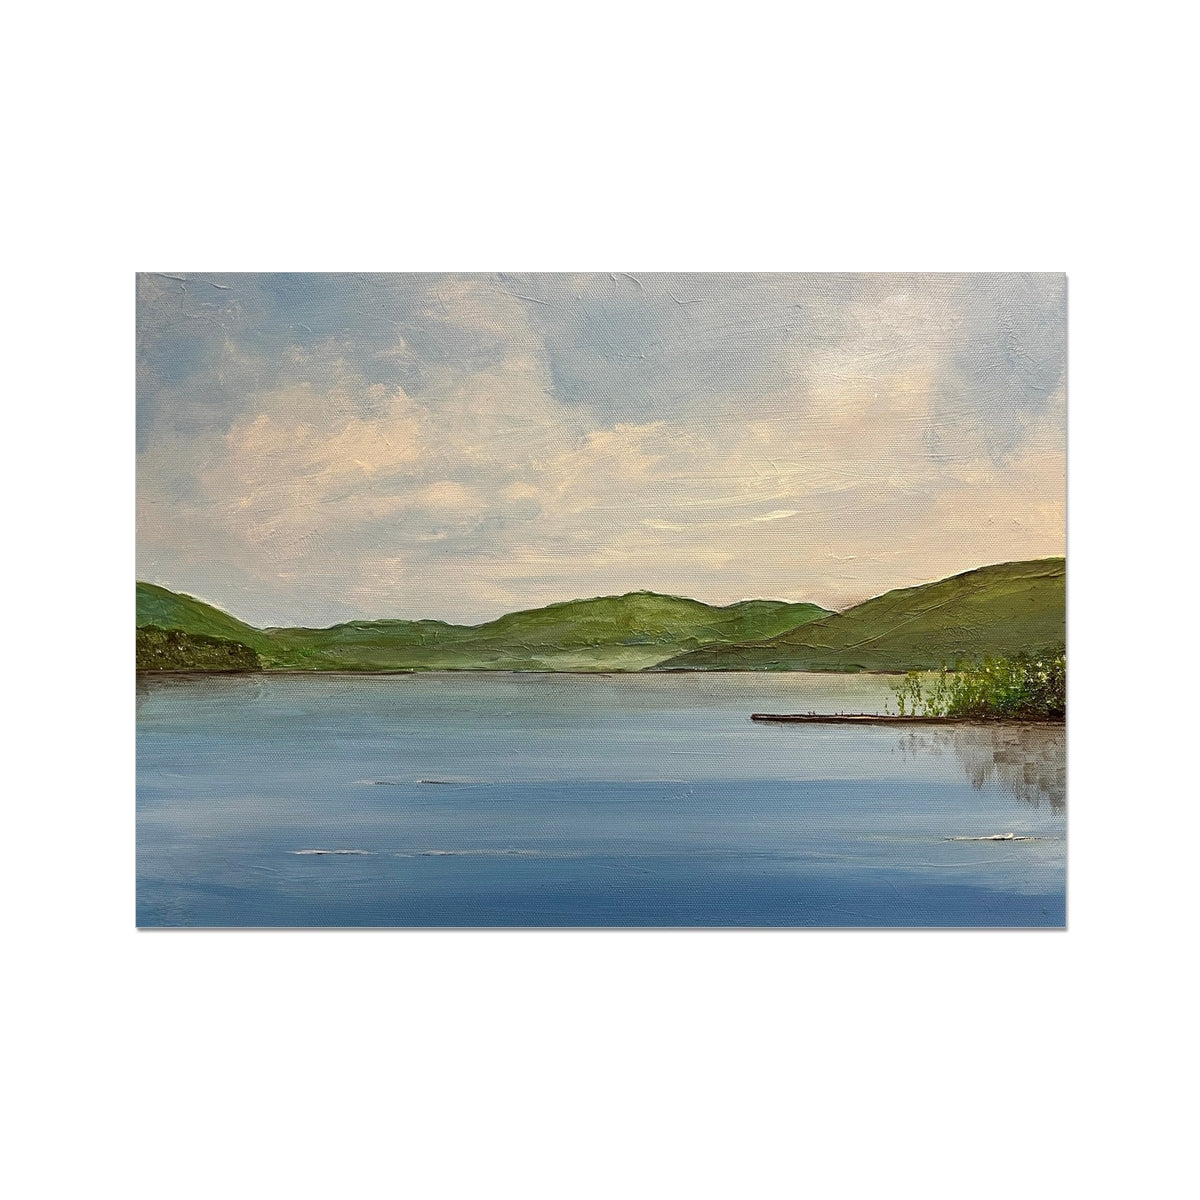 Loch Tay ii Painting | Fine Art Prints From Scotland-Fine art-Scottish Lochs & Mountains Art Gallery-A2 Landscape-Paintings, Prints, Homeware, Art Gifts From Scotland By Scottish Artist Kevin Hunter